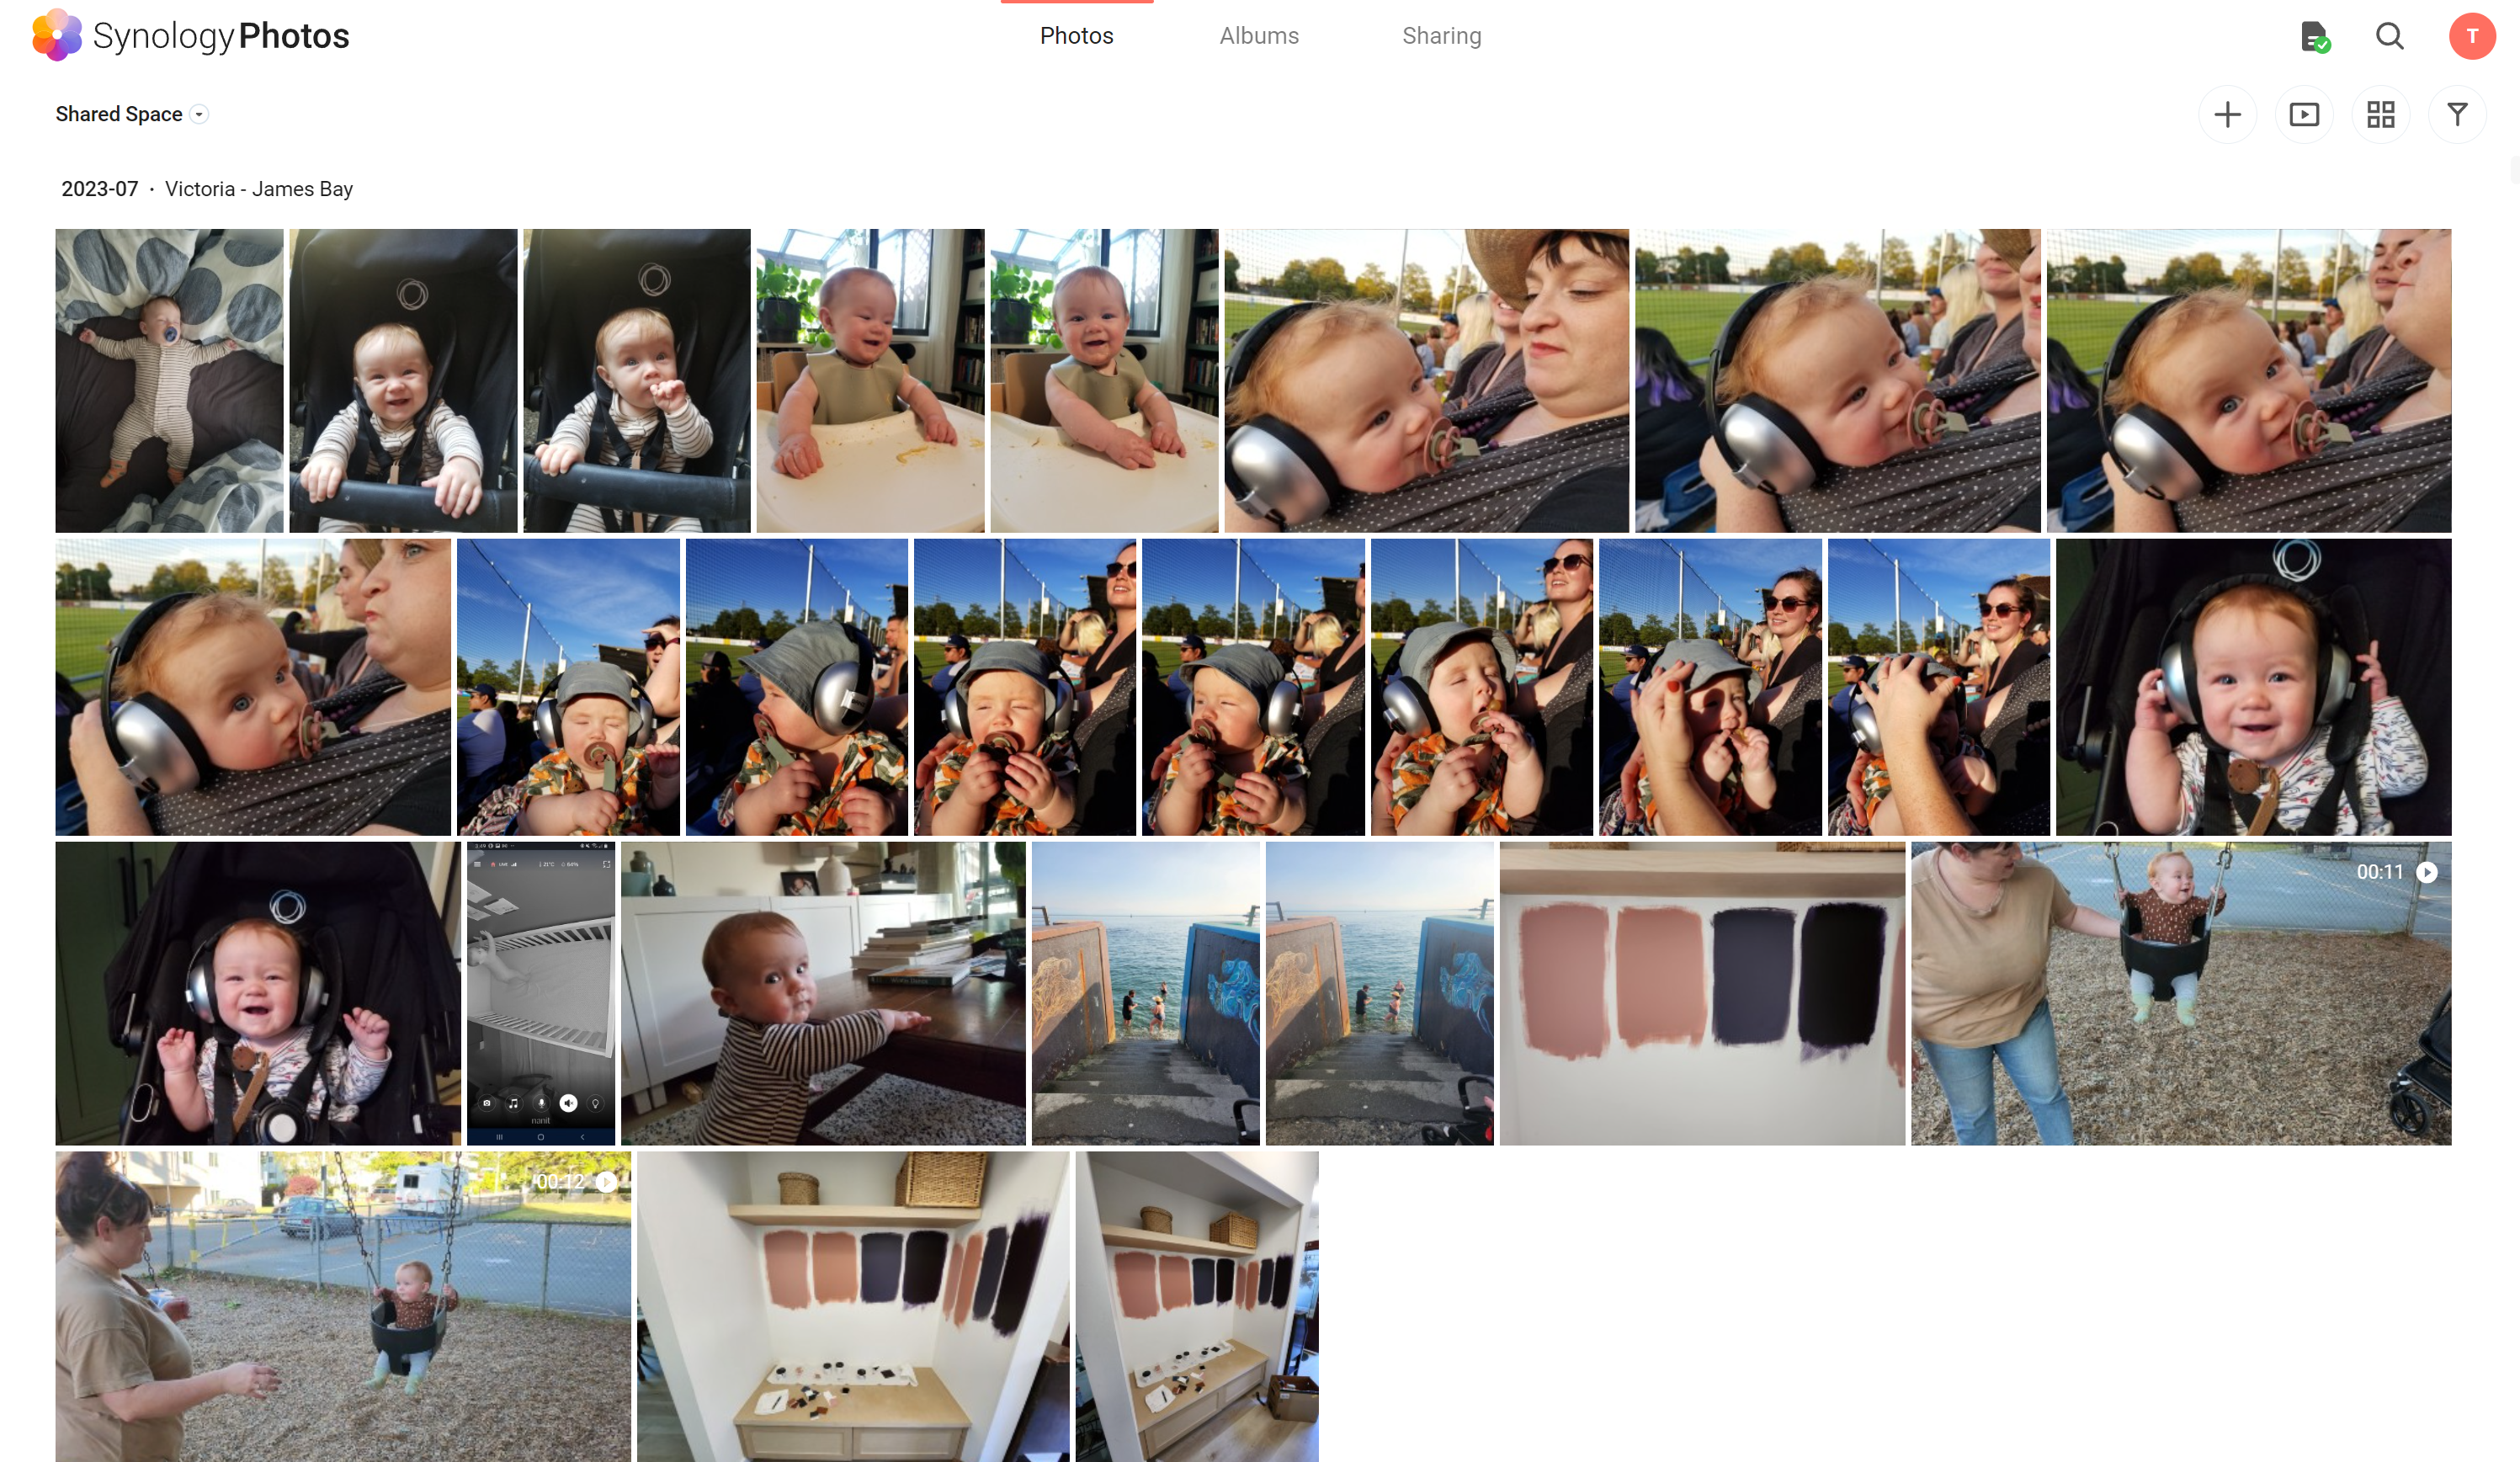 web interface for synology photos showing a grid of family photos